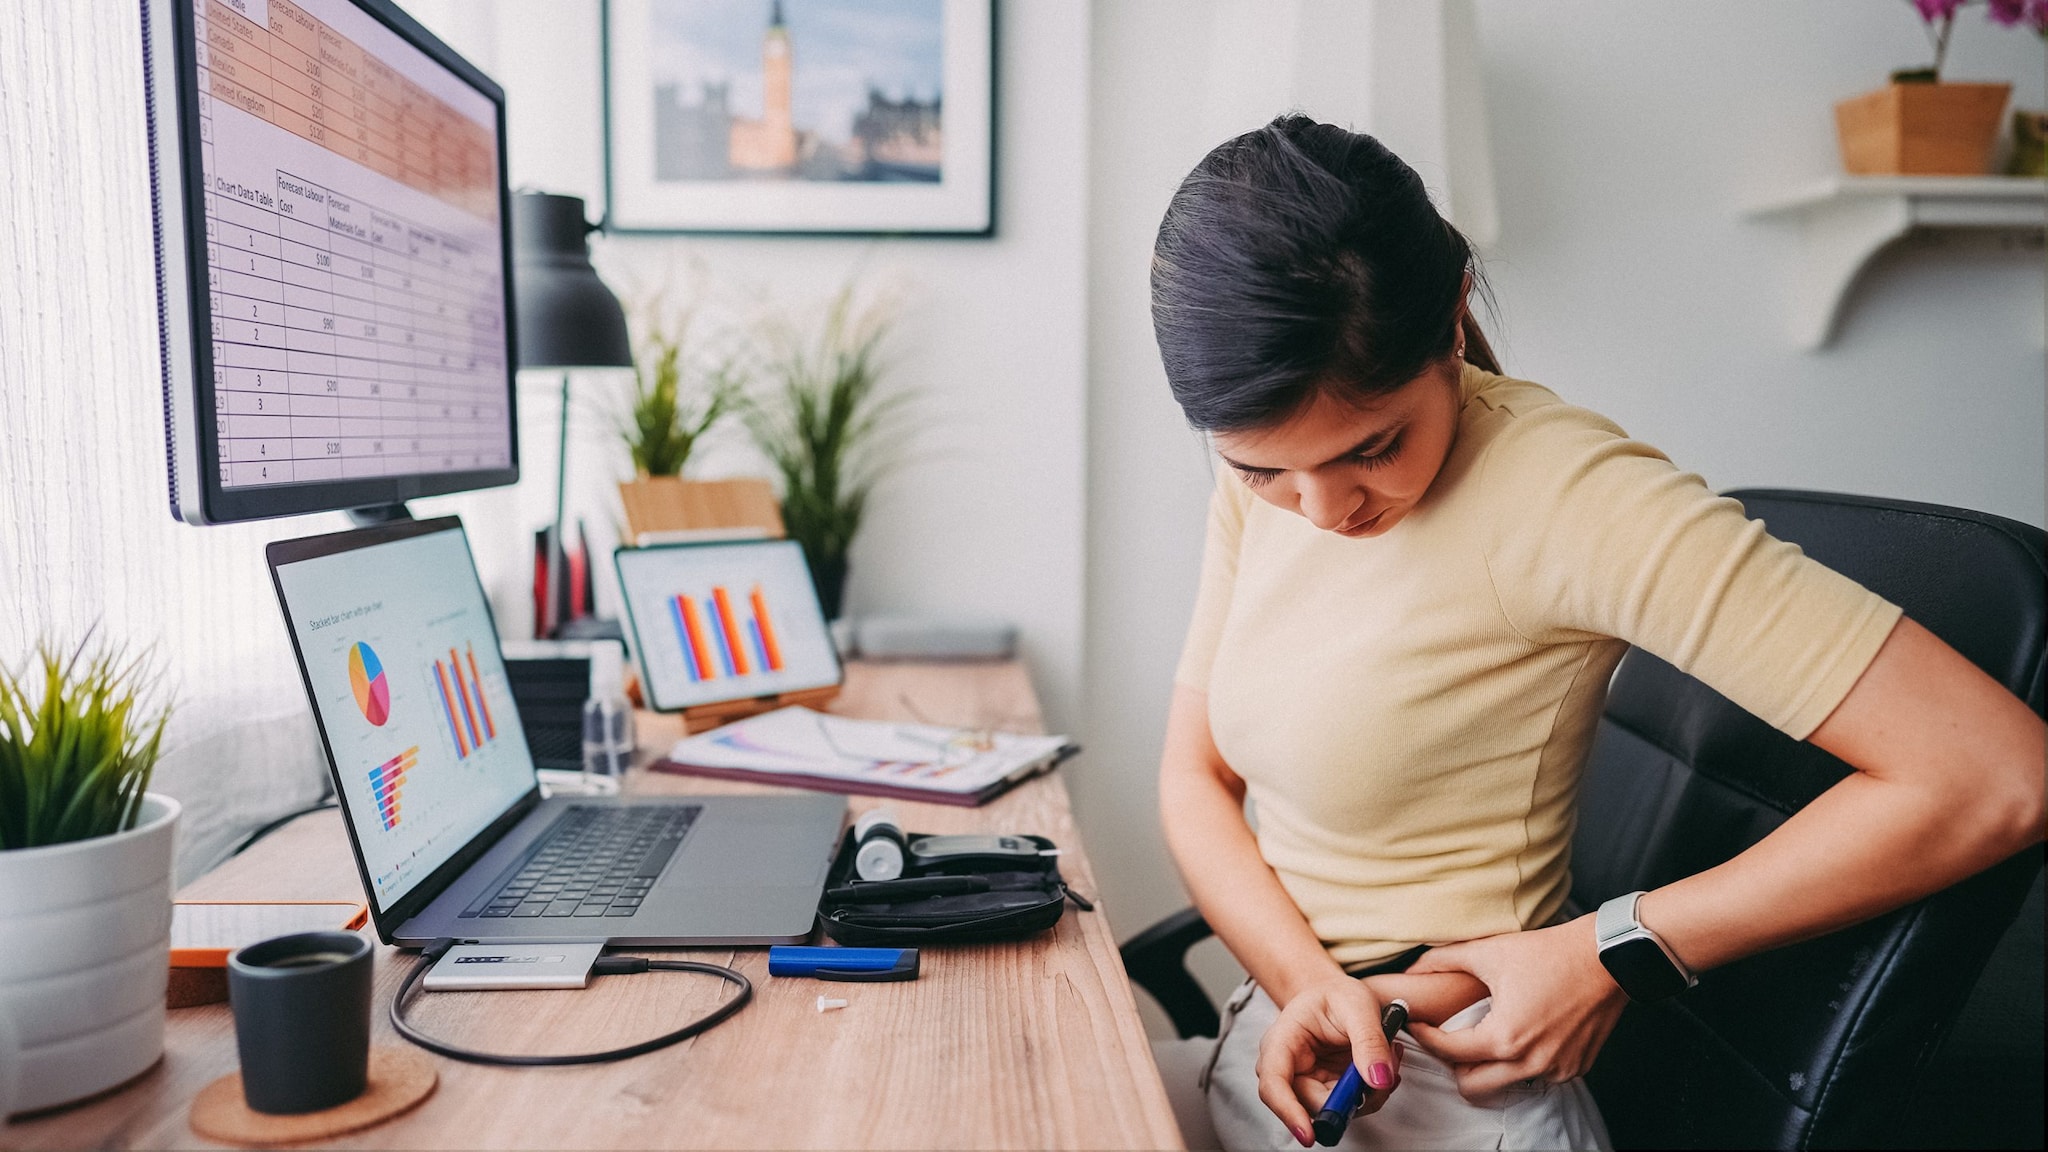 Adult woman injecting insulin with an insulin pen in her office.